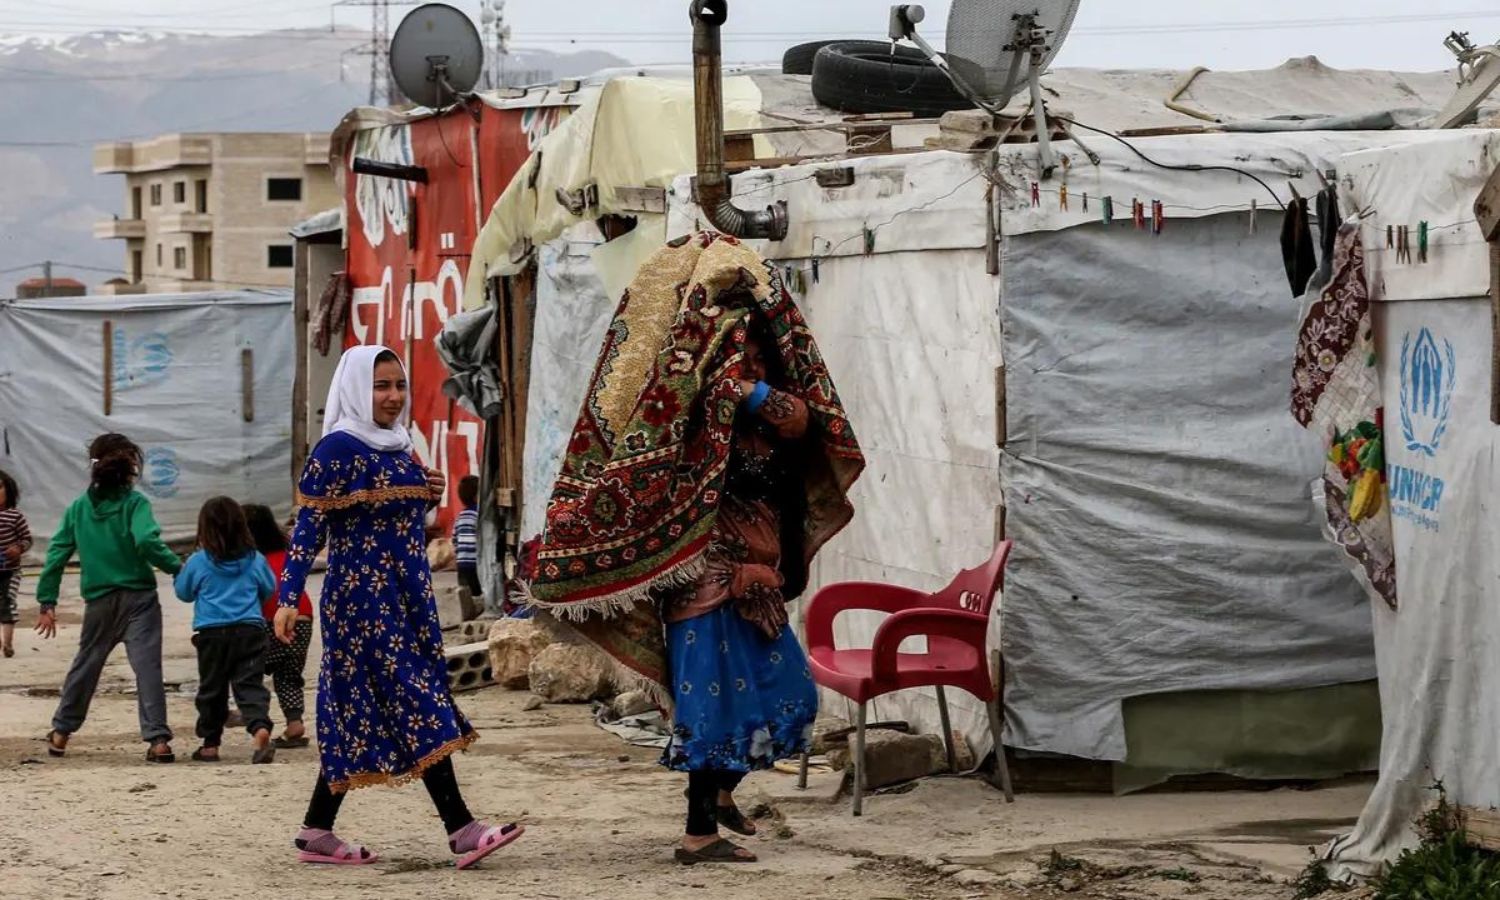 Refugees in a camp inhabited by Syrians and Palestinians in the Bekaa Valley in Lebanon - March 2020 (EPA)